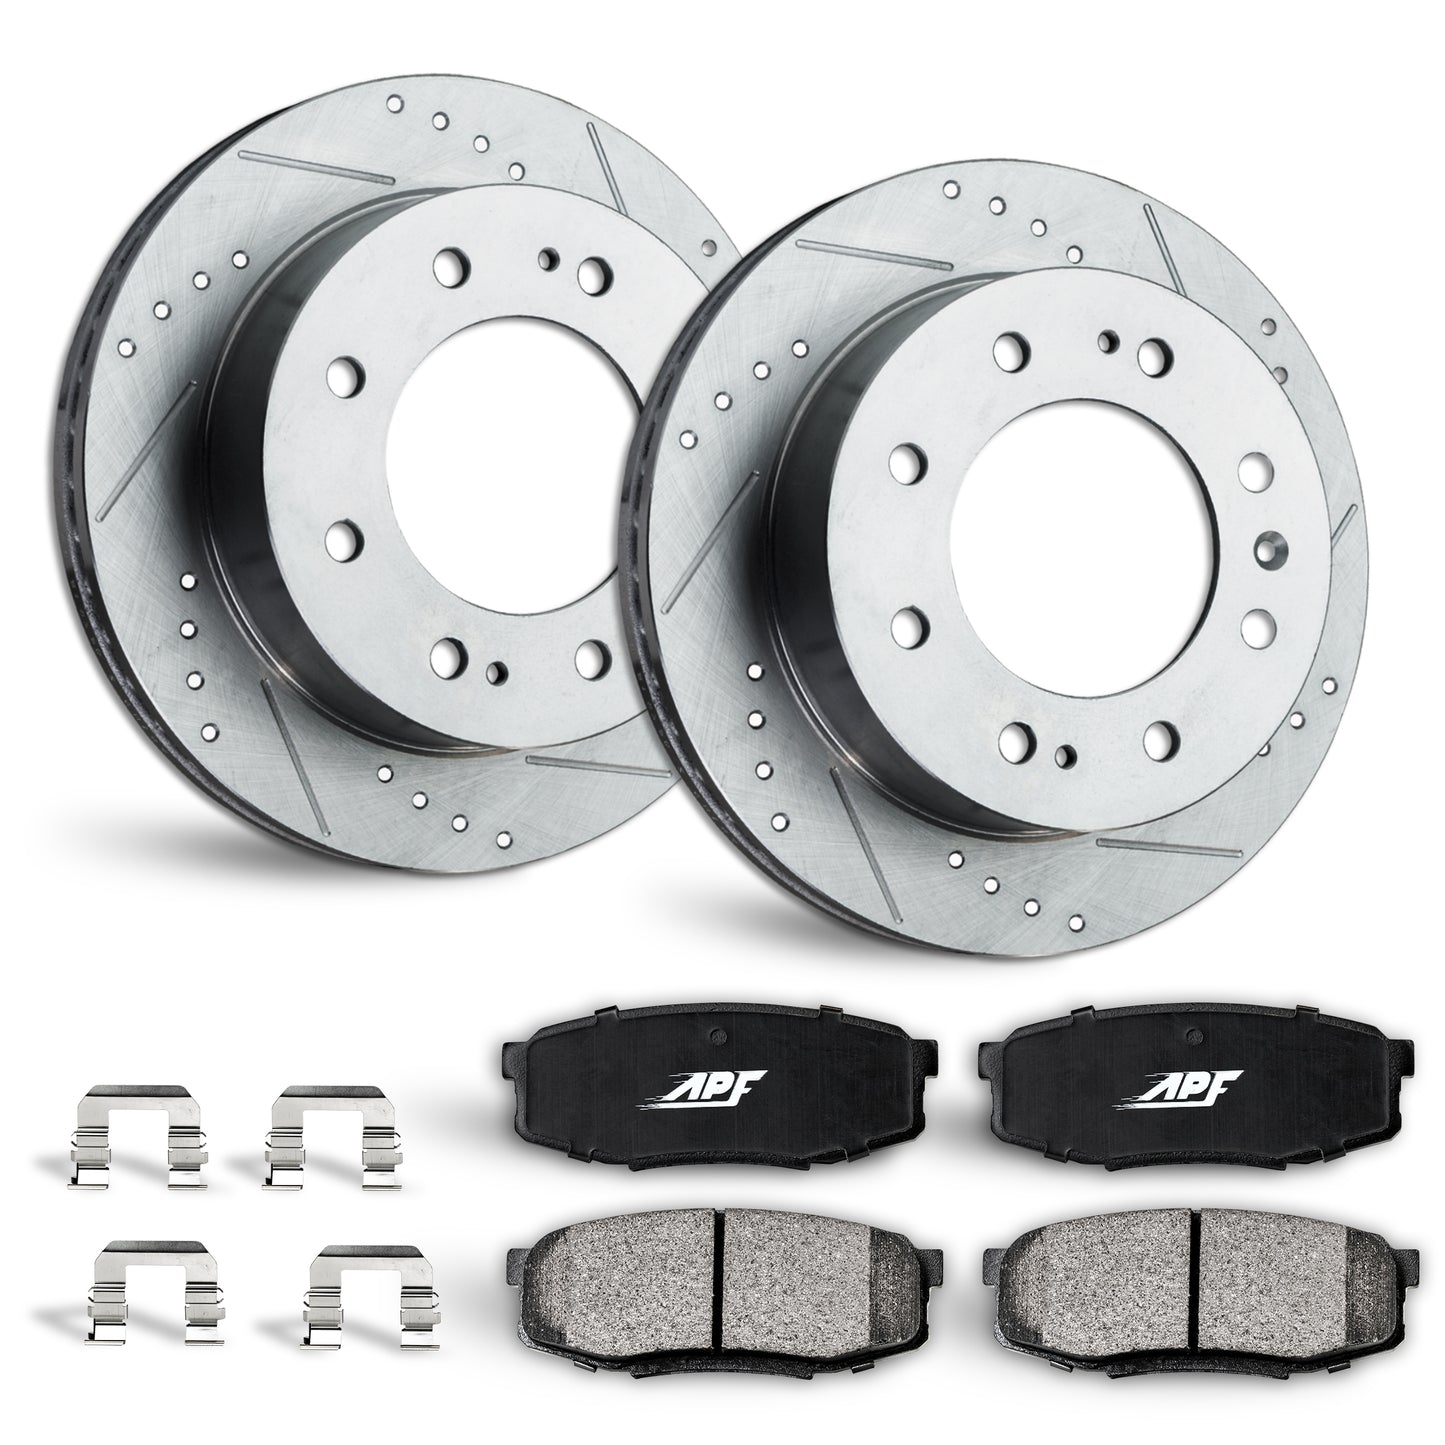 APF Rear Brake Kit compatible with GMC Sierra 3500 HD SRW 2011-2015 | Zinc Drilled Slotted Rotors with Ceramic Carbon Fiber Brake Pads